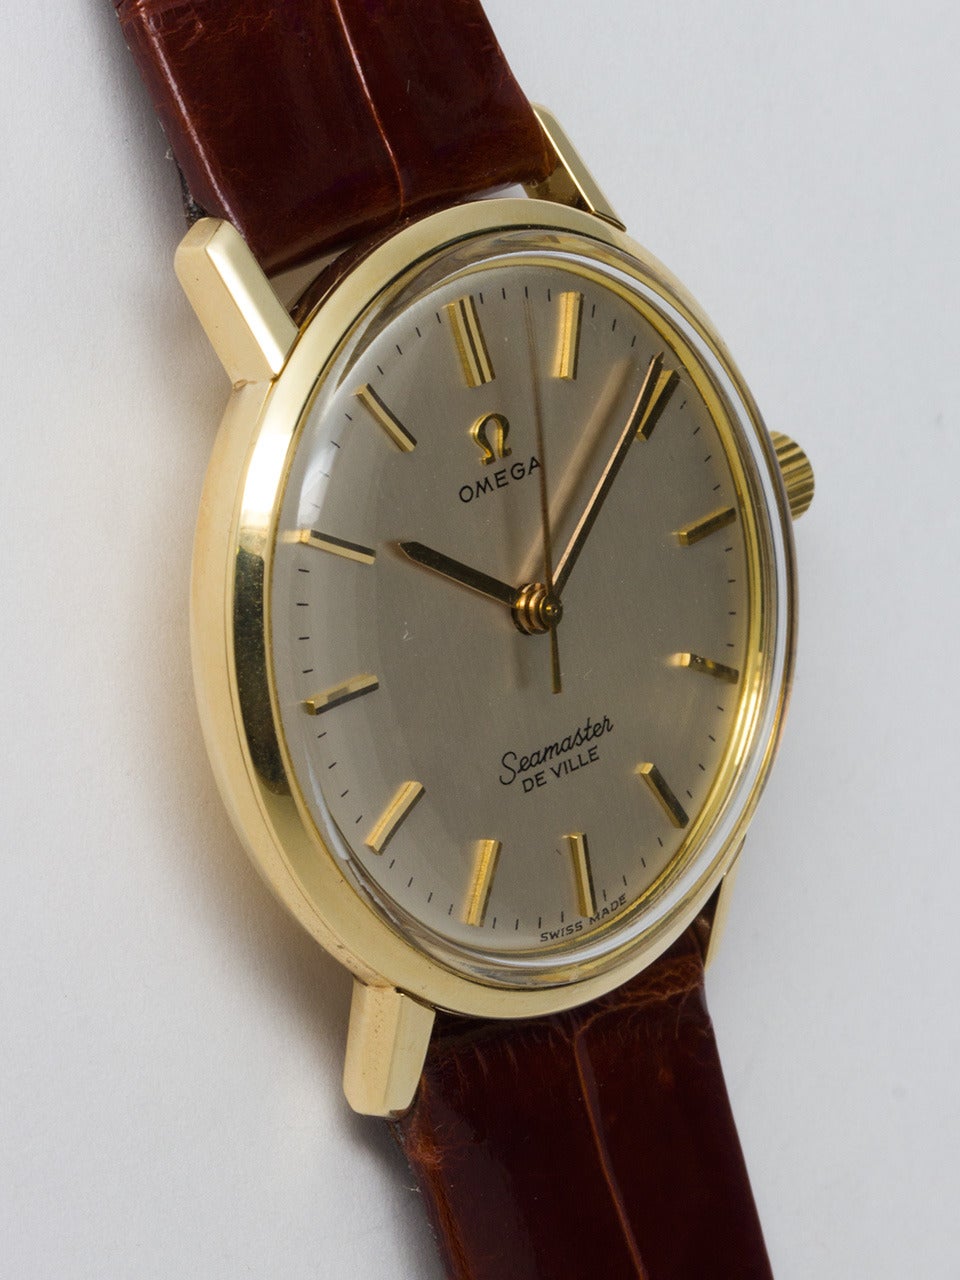 Omega 14K Yellow Gold Seamaster DeVille Wristwatch, Ref. 135.010 circa 1967. 34mm case with deeply embossed seamonster logo on case back, signed Omega crown. Beautiful condition original silvered satin dial with raised yellow gold baton markers and